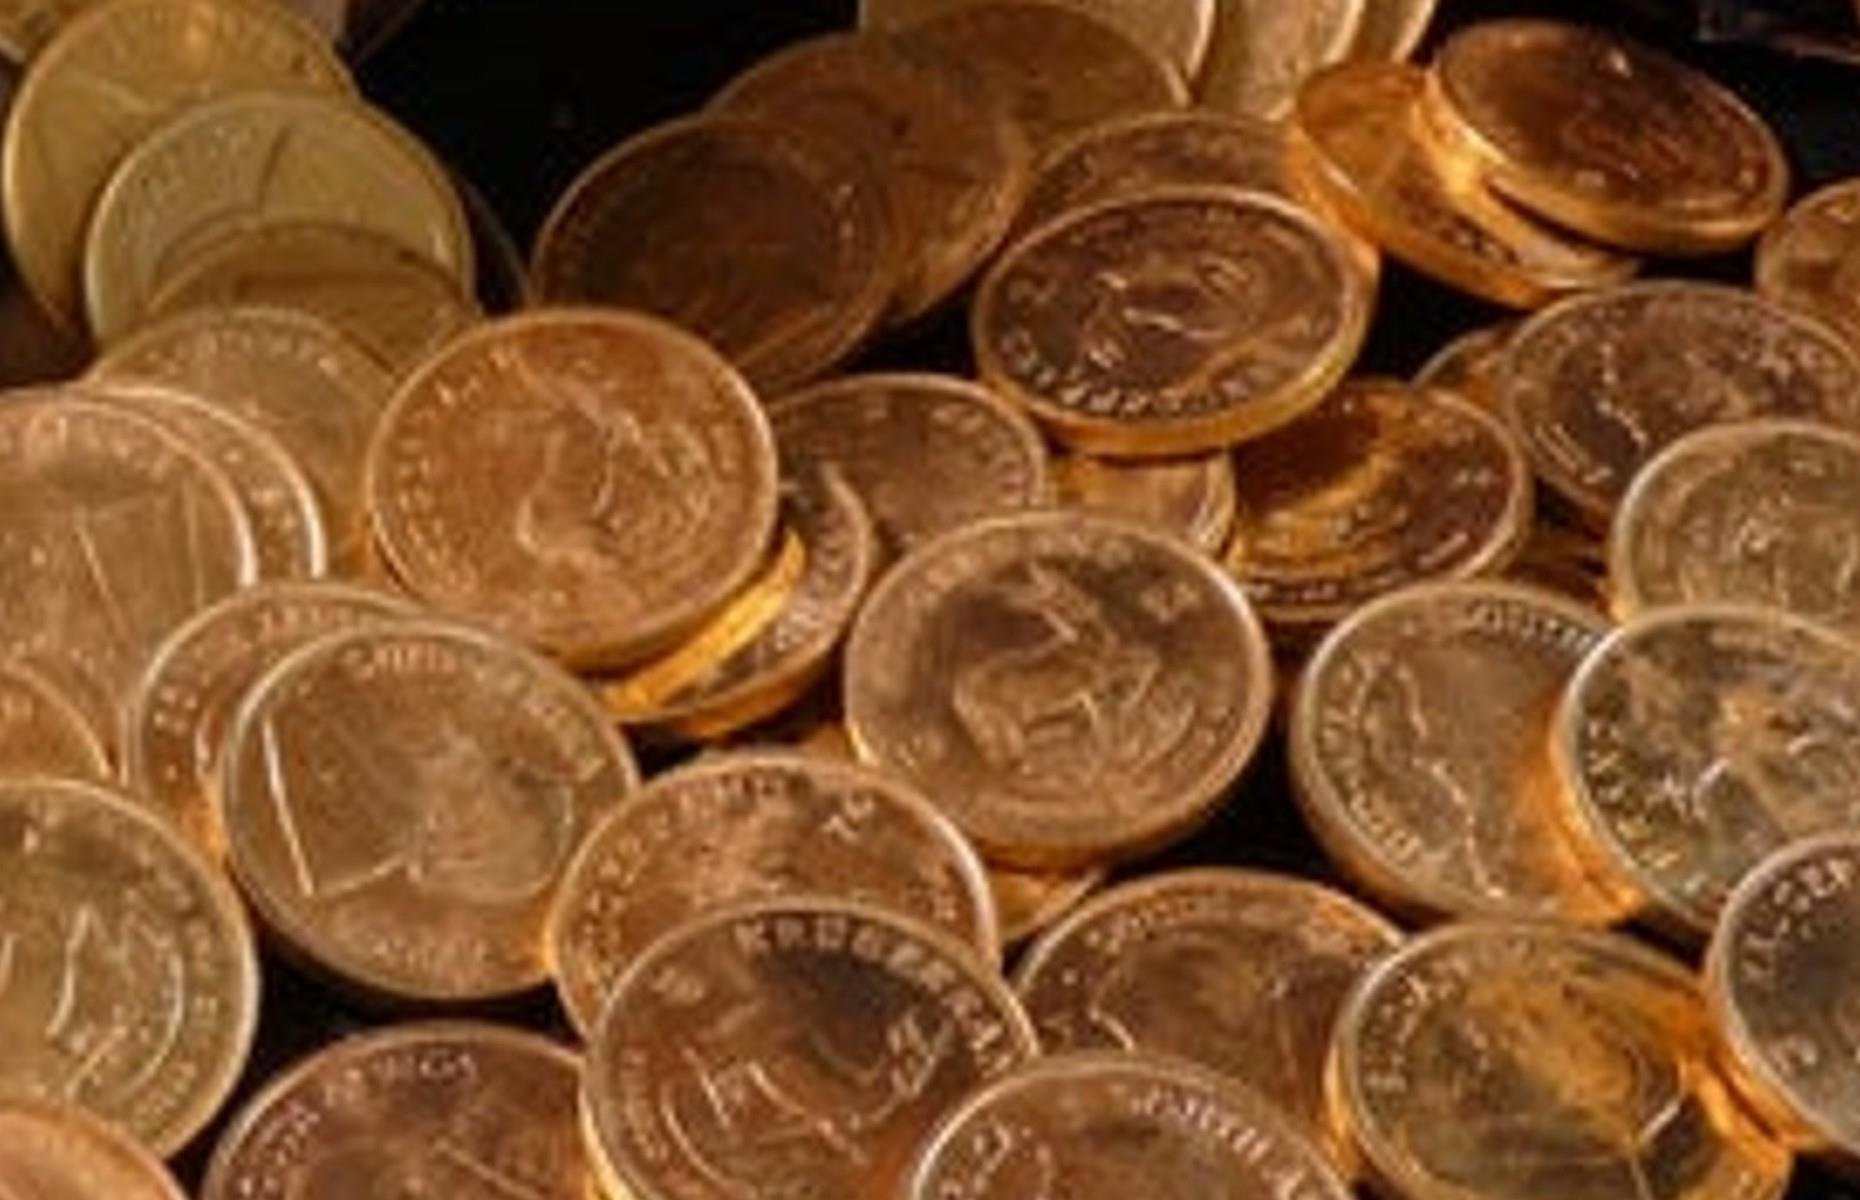 The South African Krugerrand hoard